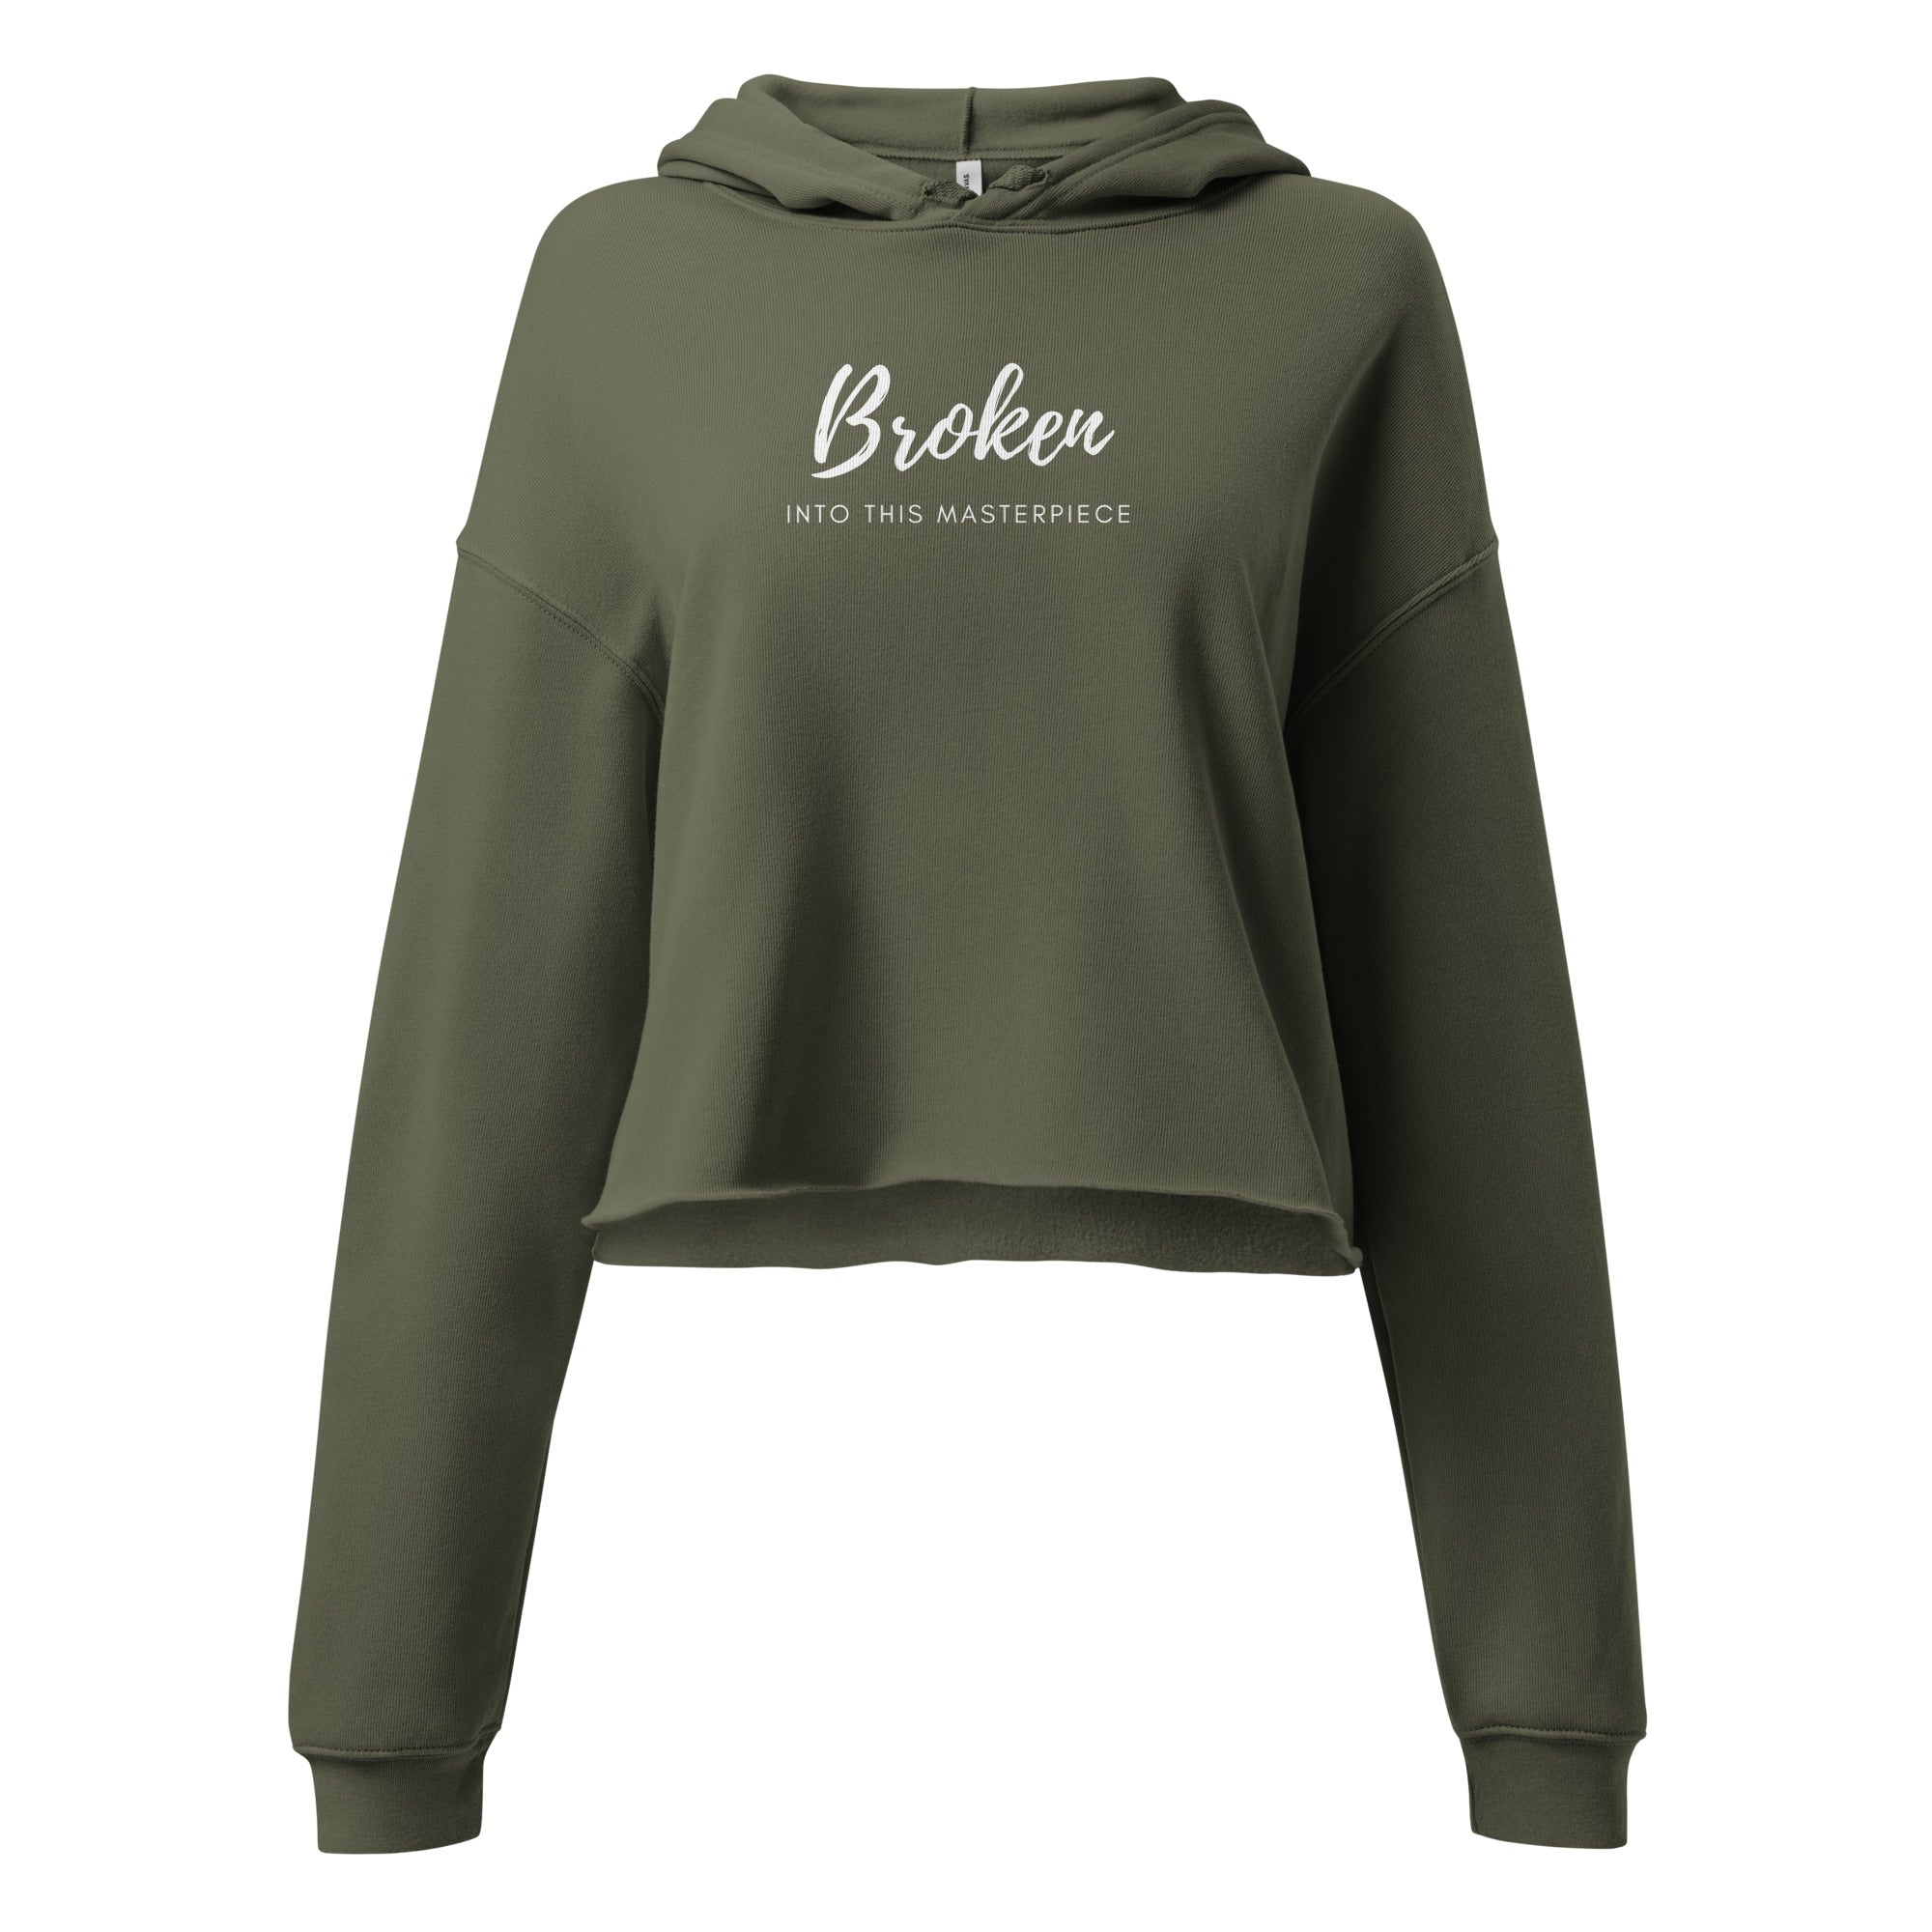 "Broken into this Masterpiece" Crop Sweater – Stylishly Empowered